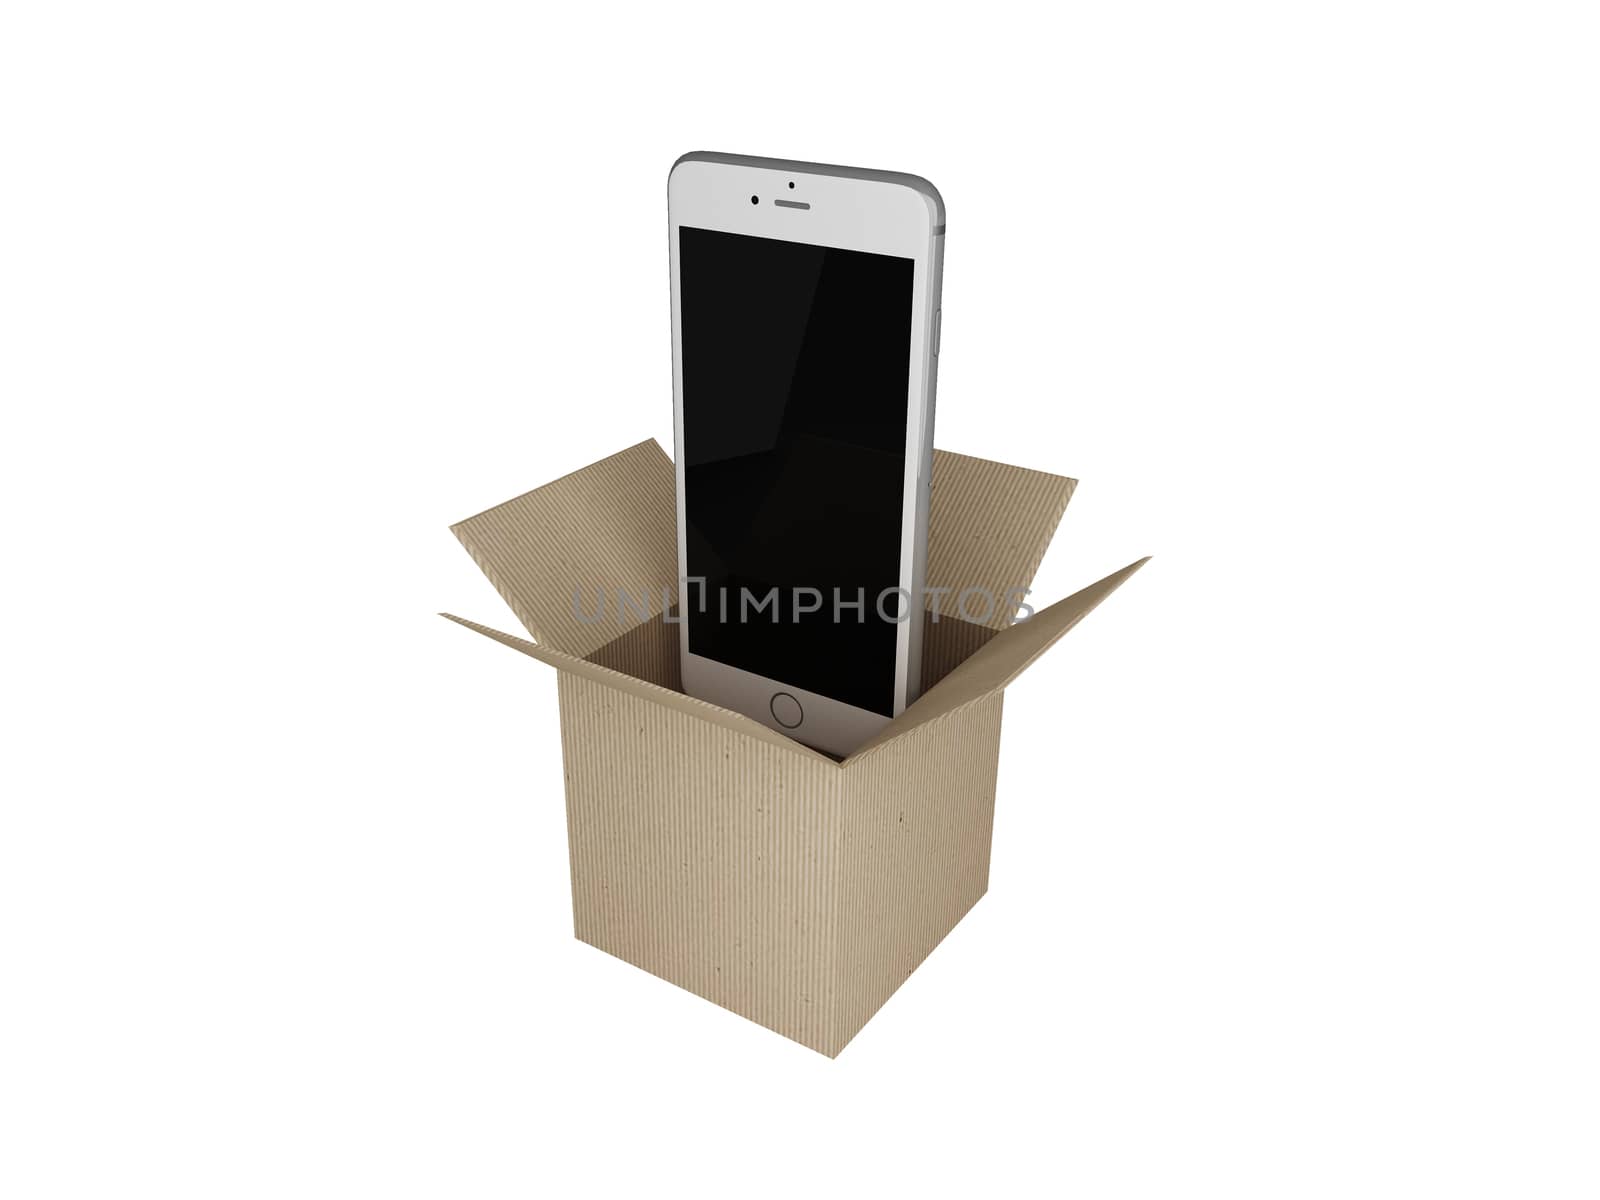 Smart phones out of the box in brown paper